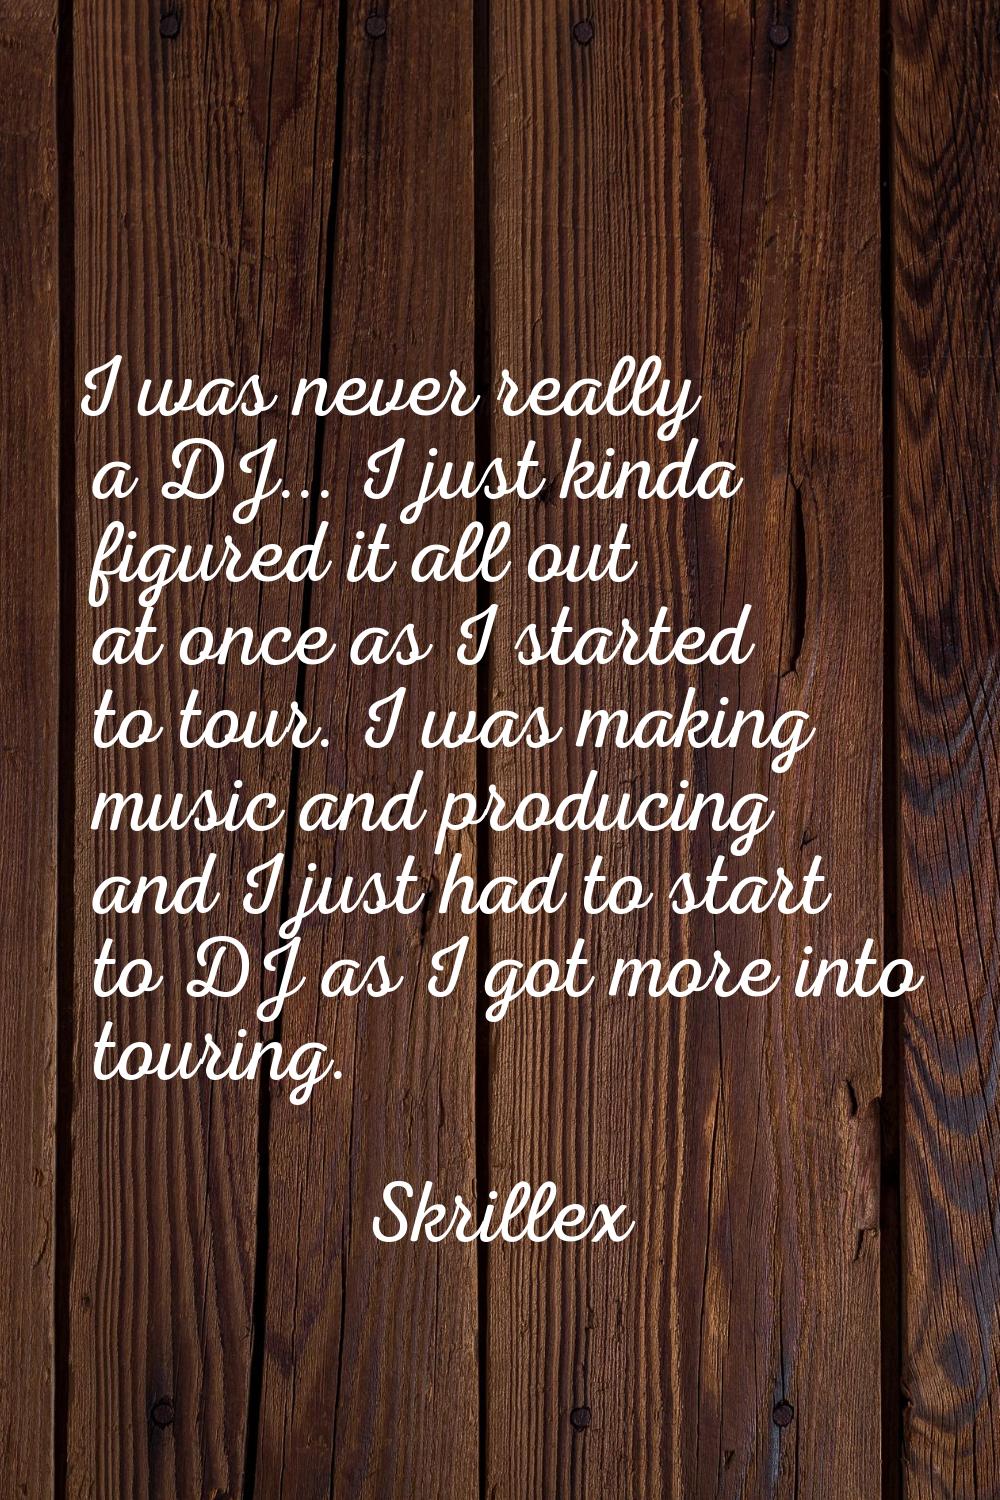 I was never really a DJ... I just kinda figured it all out at once as I started to tour. I was maki